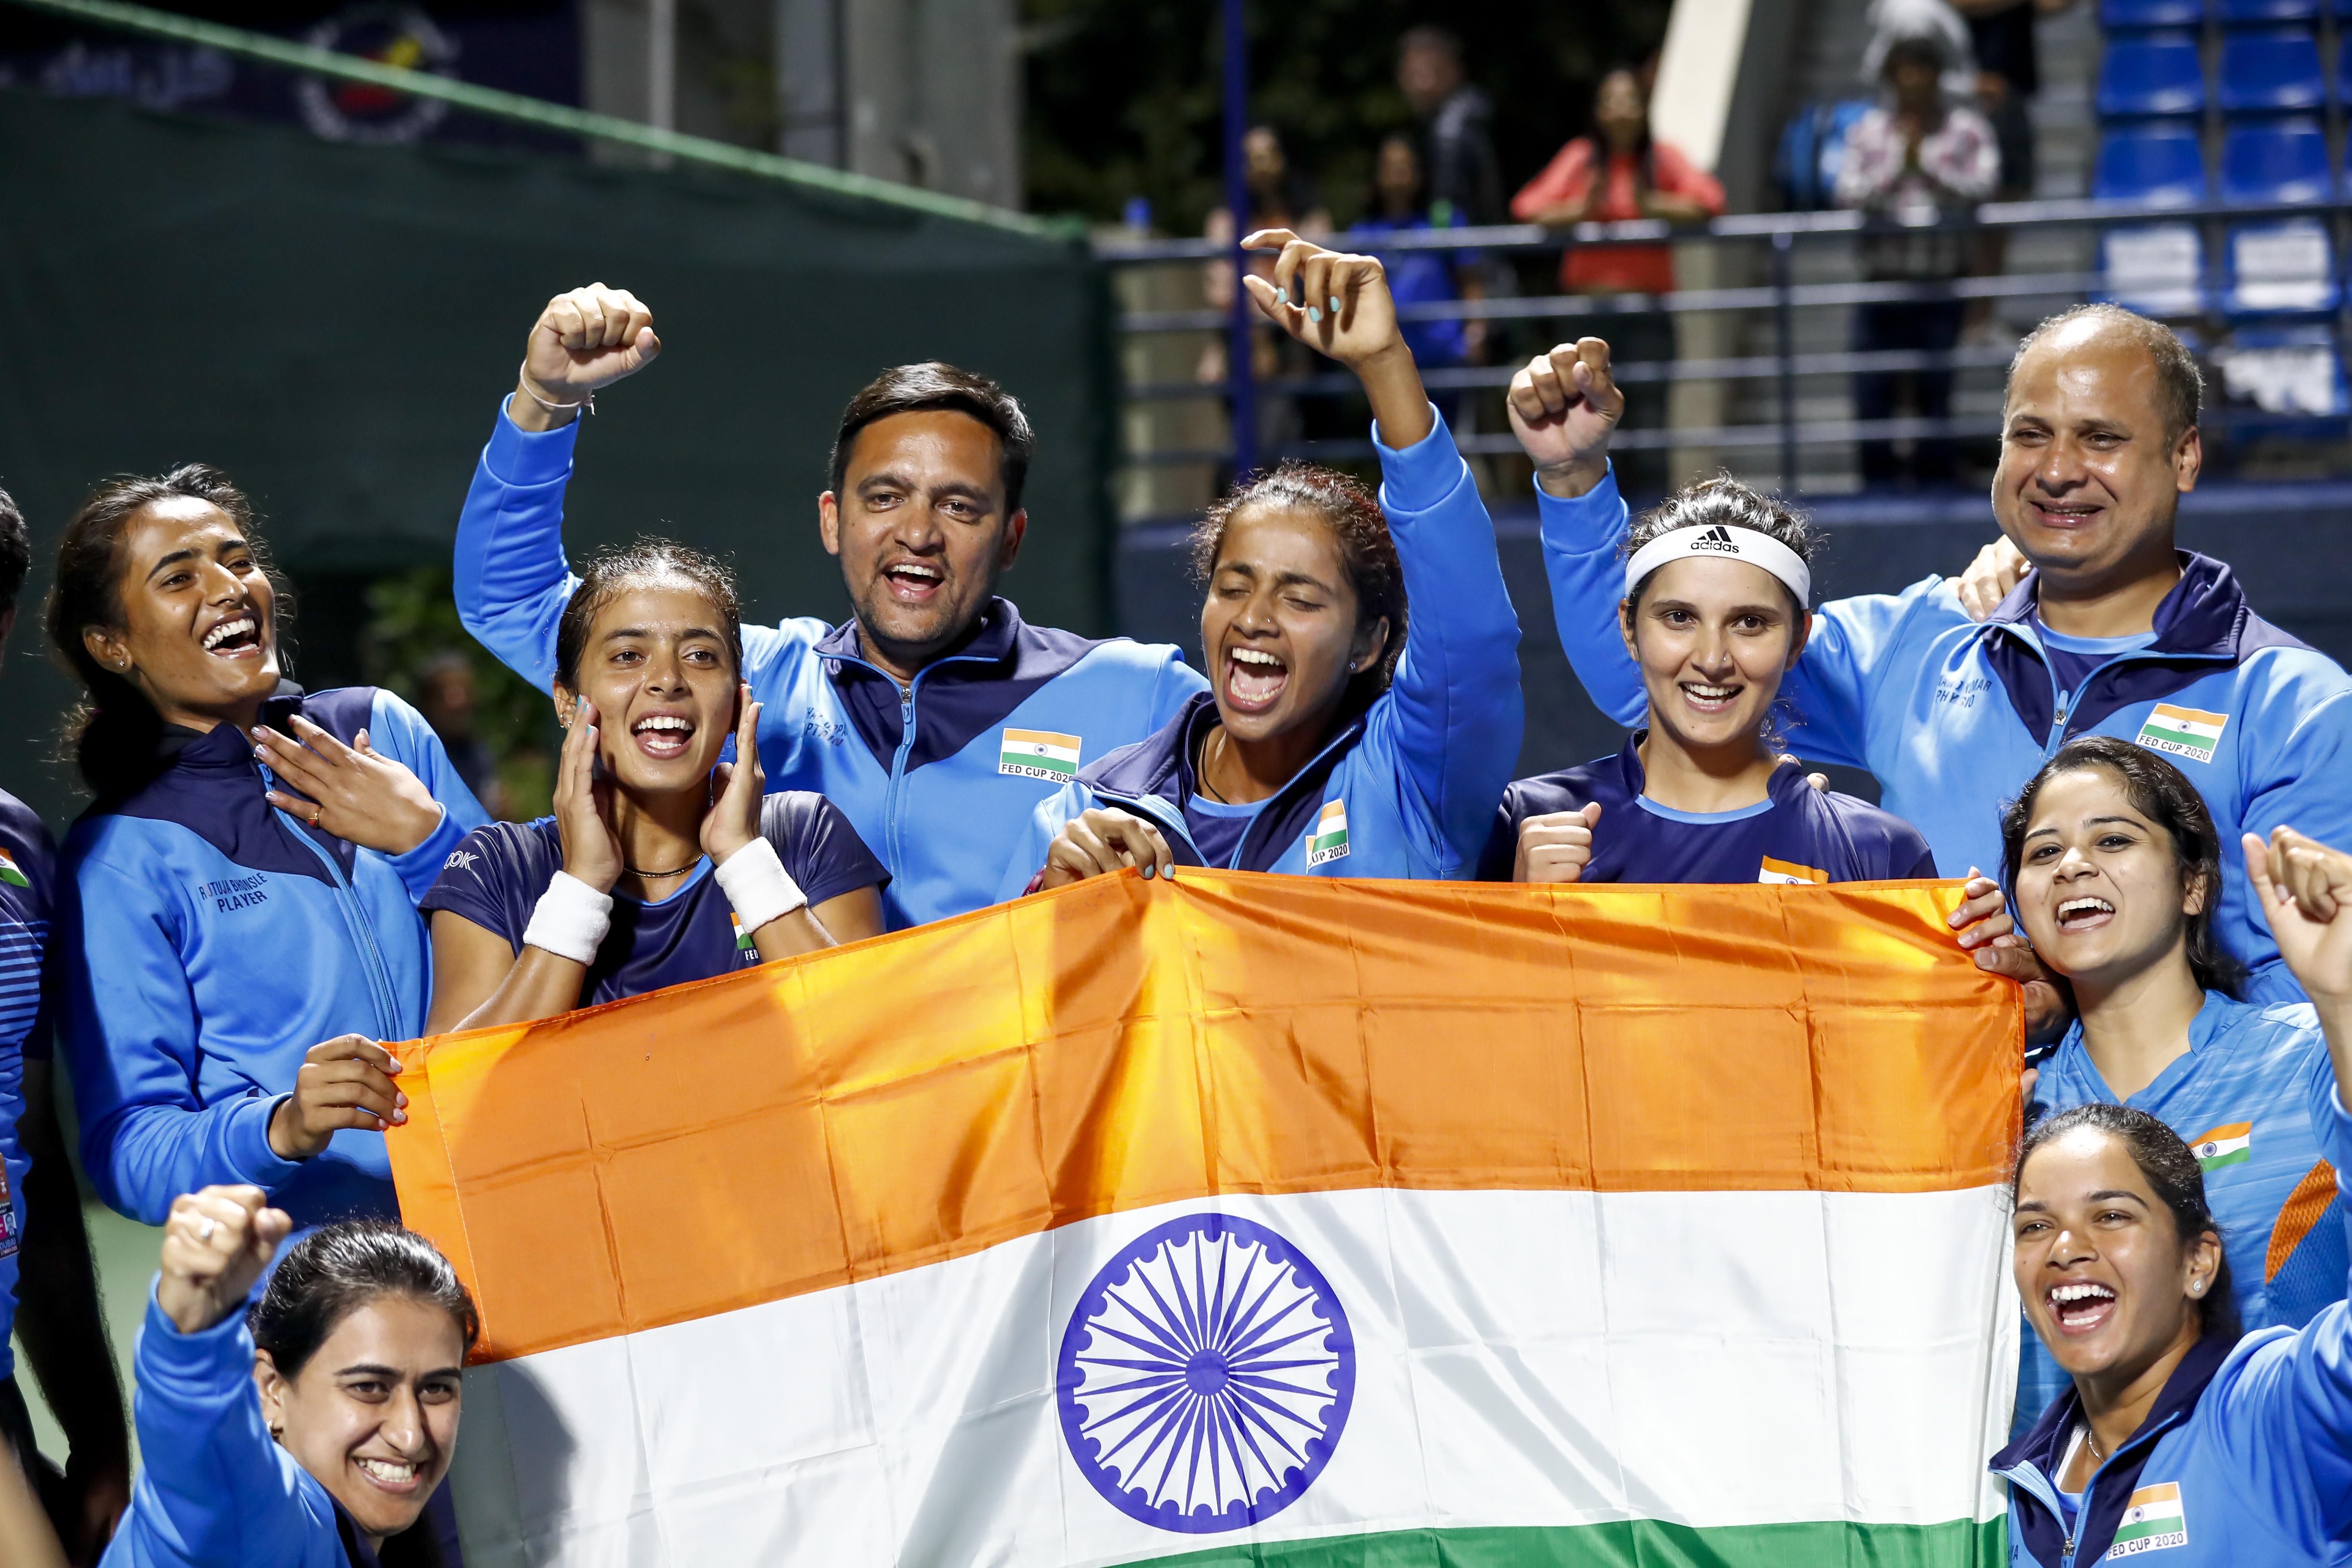 Fed Cup : Indian Team Creates History By Qualifying For The World Group Playoffs For The First Time Ever